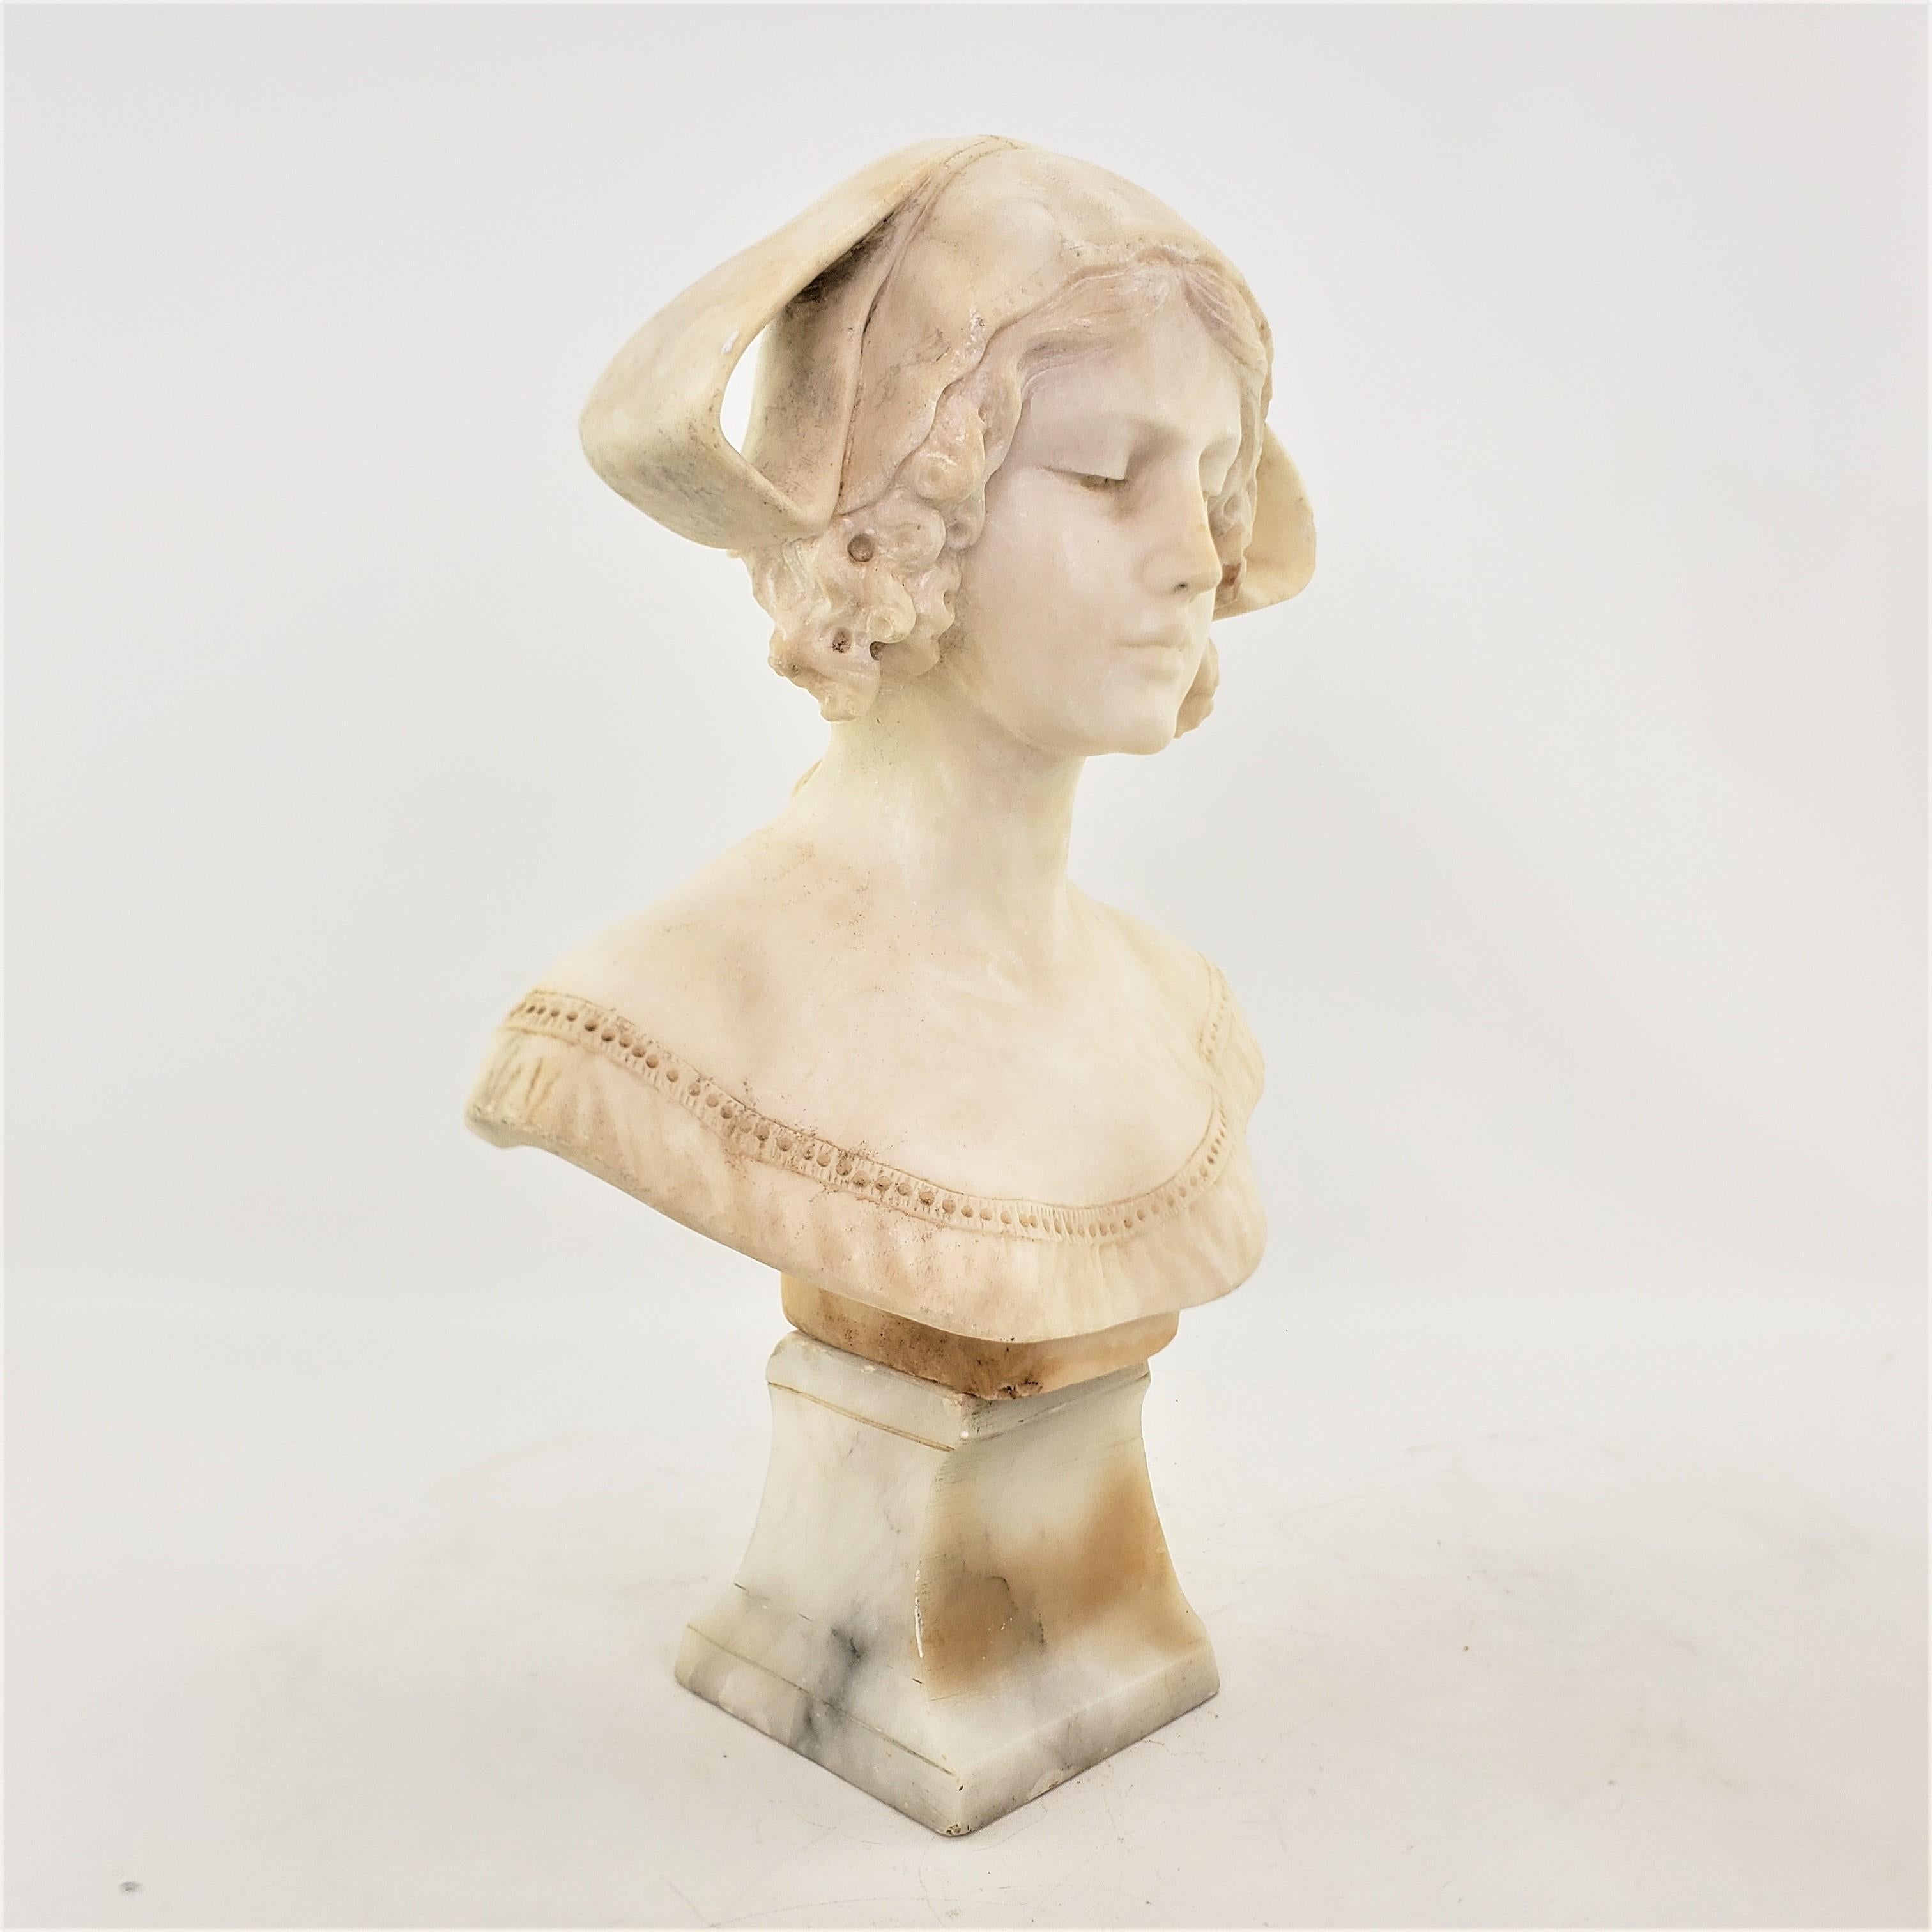 Antique Art Deco Hand-Carved Italian Bust or Sculpture of a Young Female & Base For Sale 3